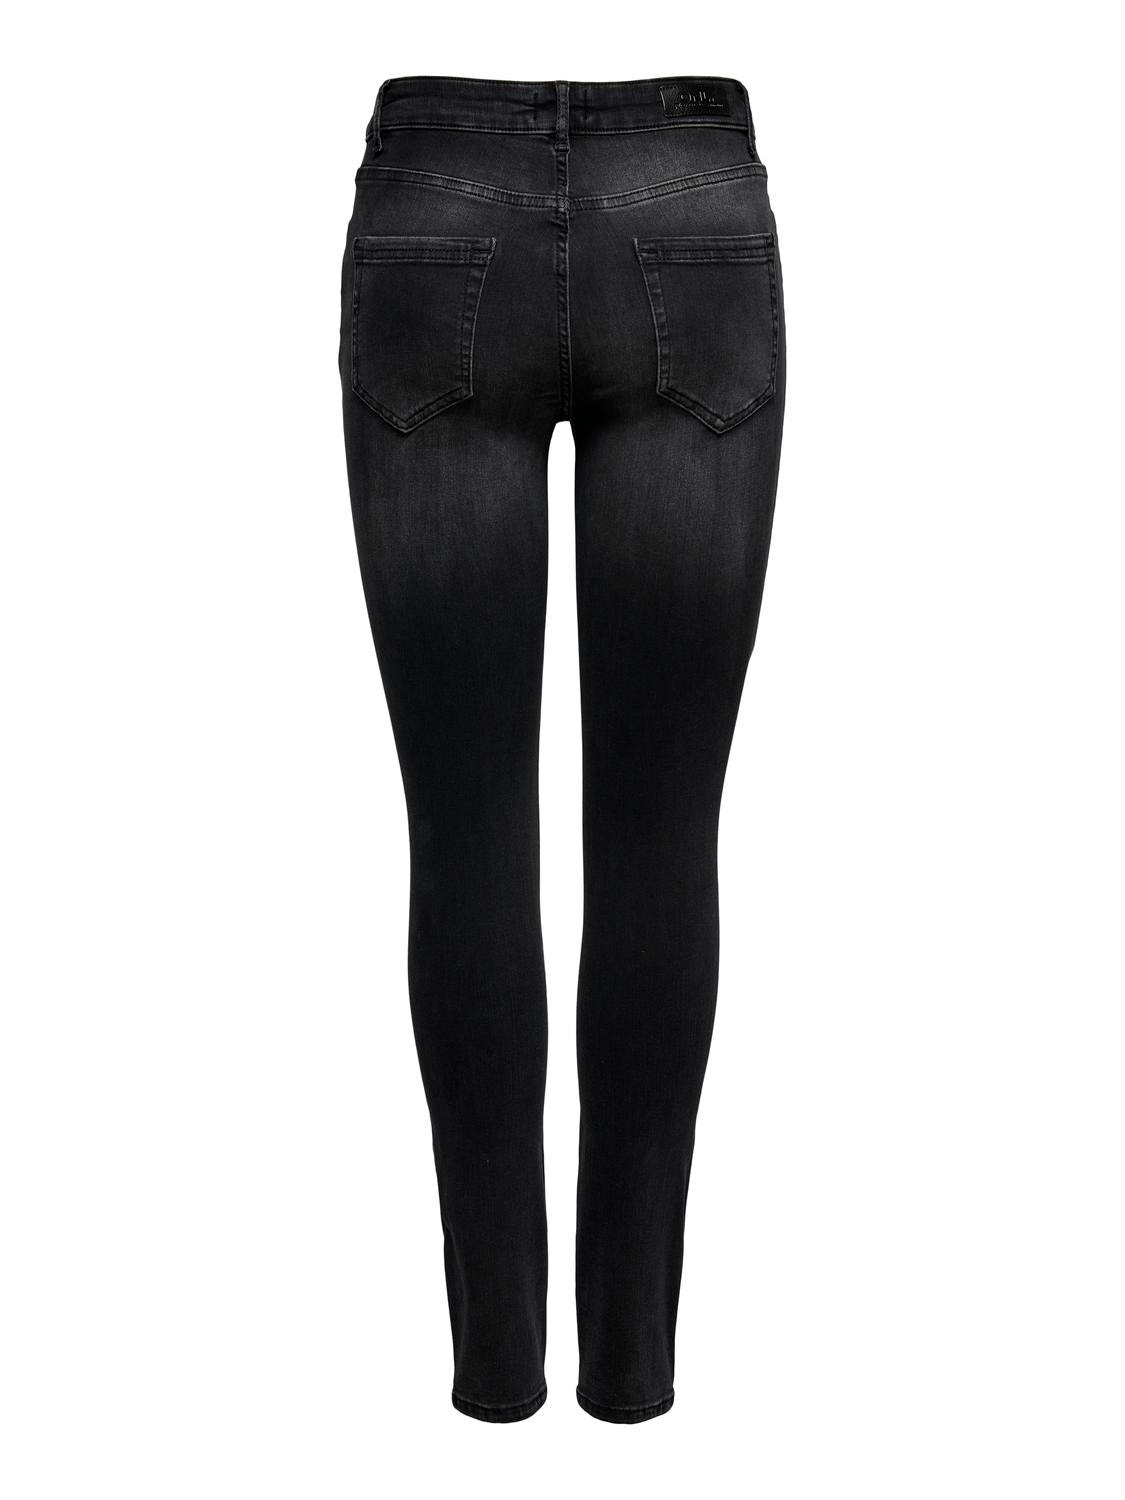 ONLY Skinny Fit Mittlere Taille Jeans -Black Denim - 15225846